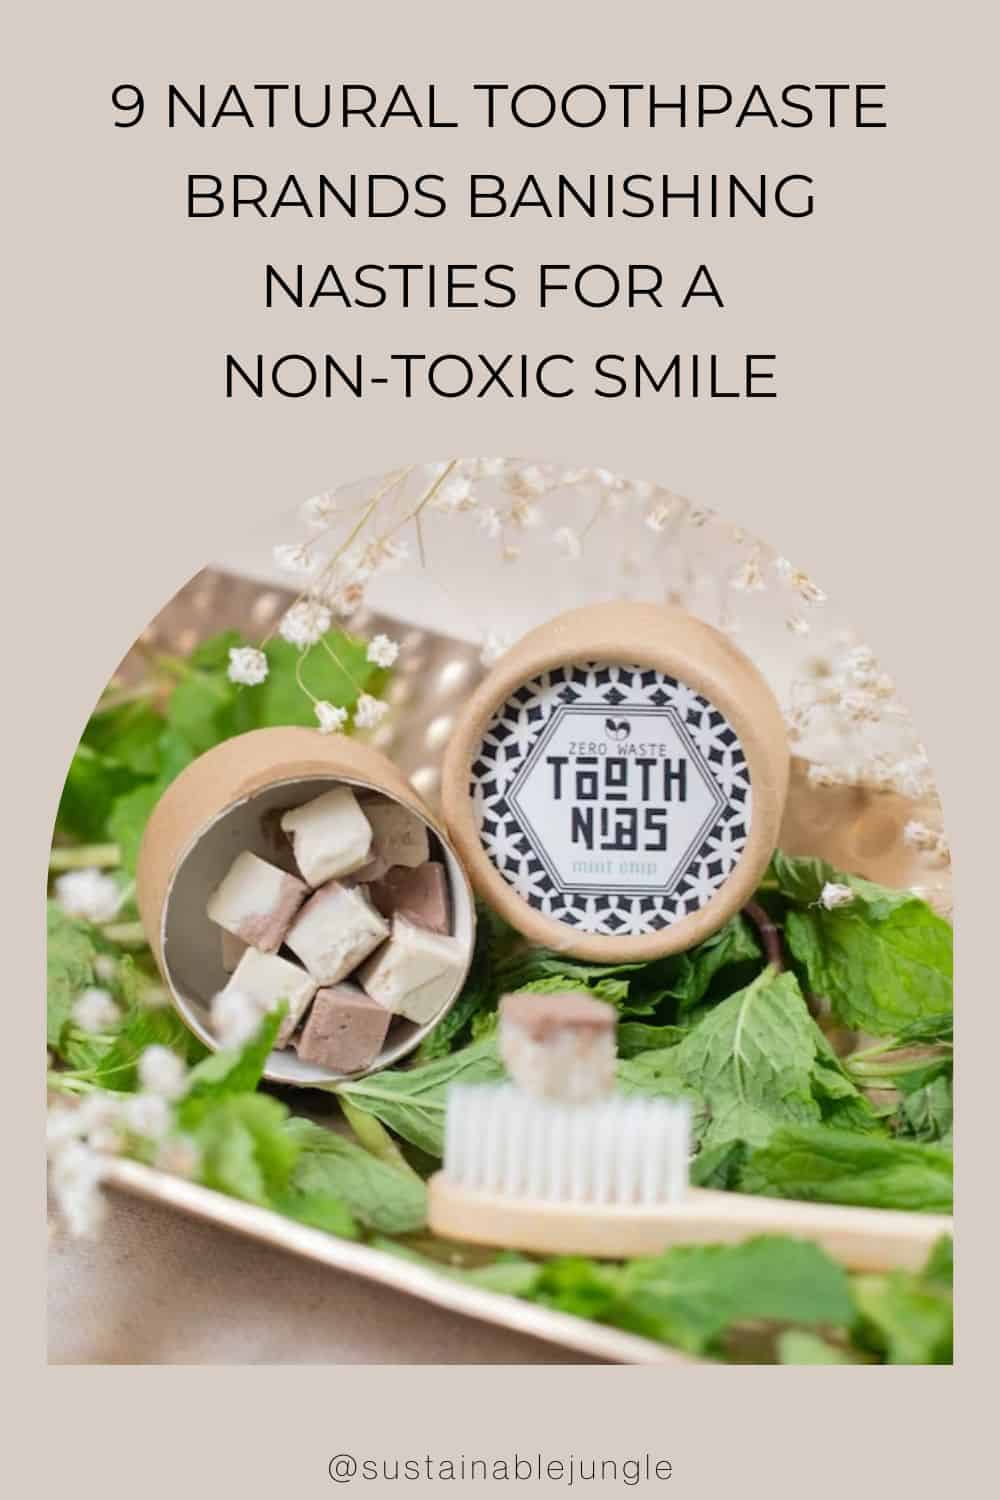 9 Natural Toothpaste Brands Banishing Nasties For A Non-Toxic Smile Image by ScentCerae #naturaltoothpaste #bestnaturaltoothpaste #allnaturaltoothpaste #organictoothpaste #organictoothpastebrands#organicfluoridefreetoothpaste #sustainablejungle